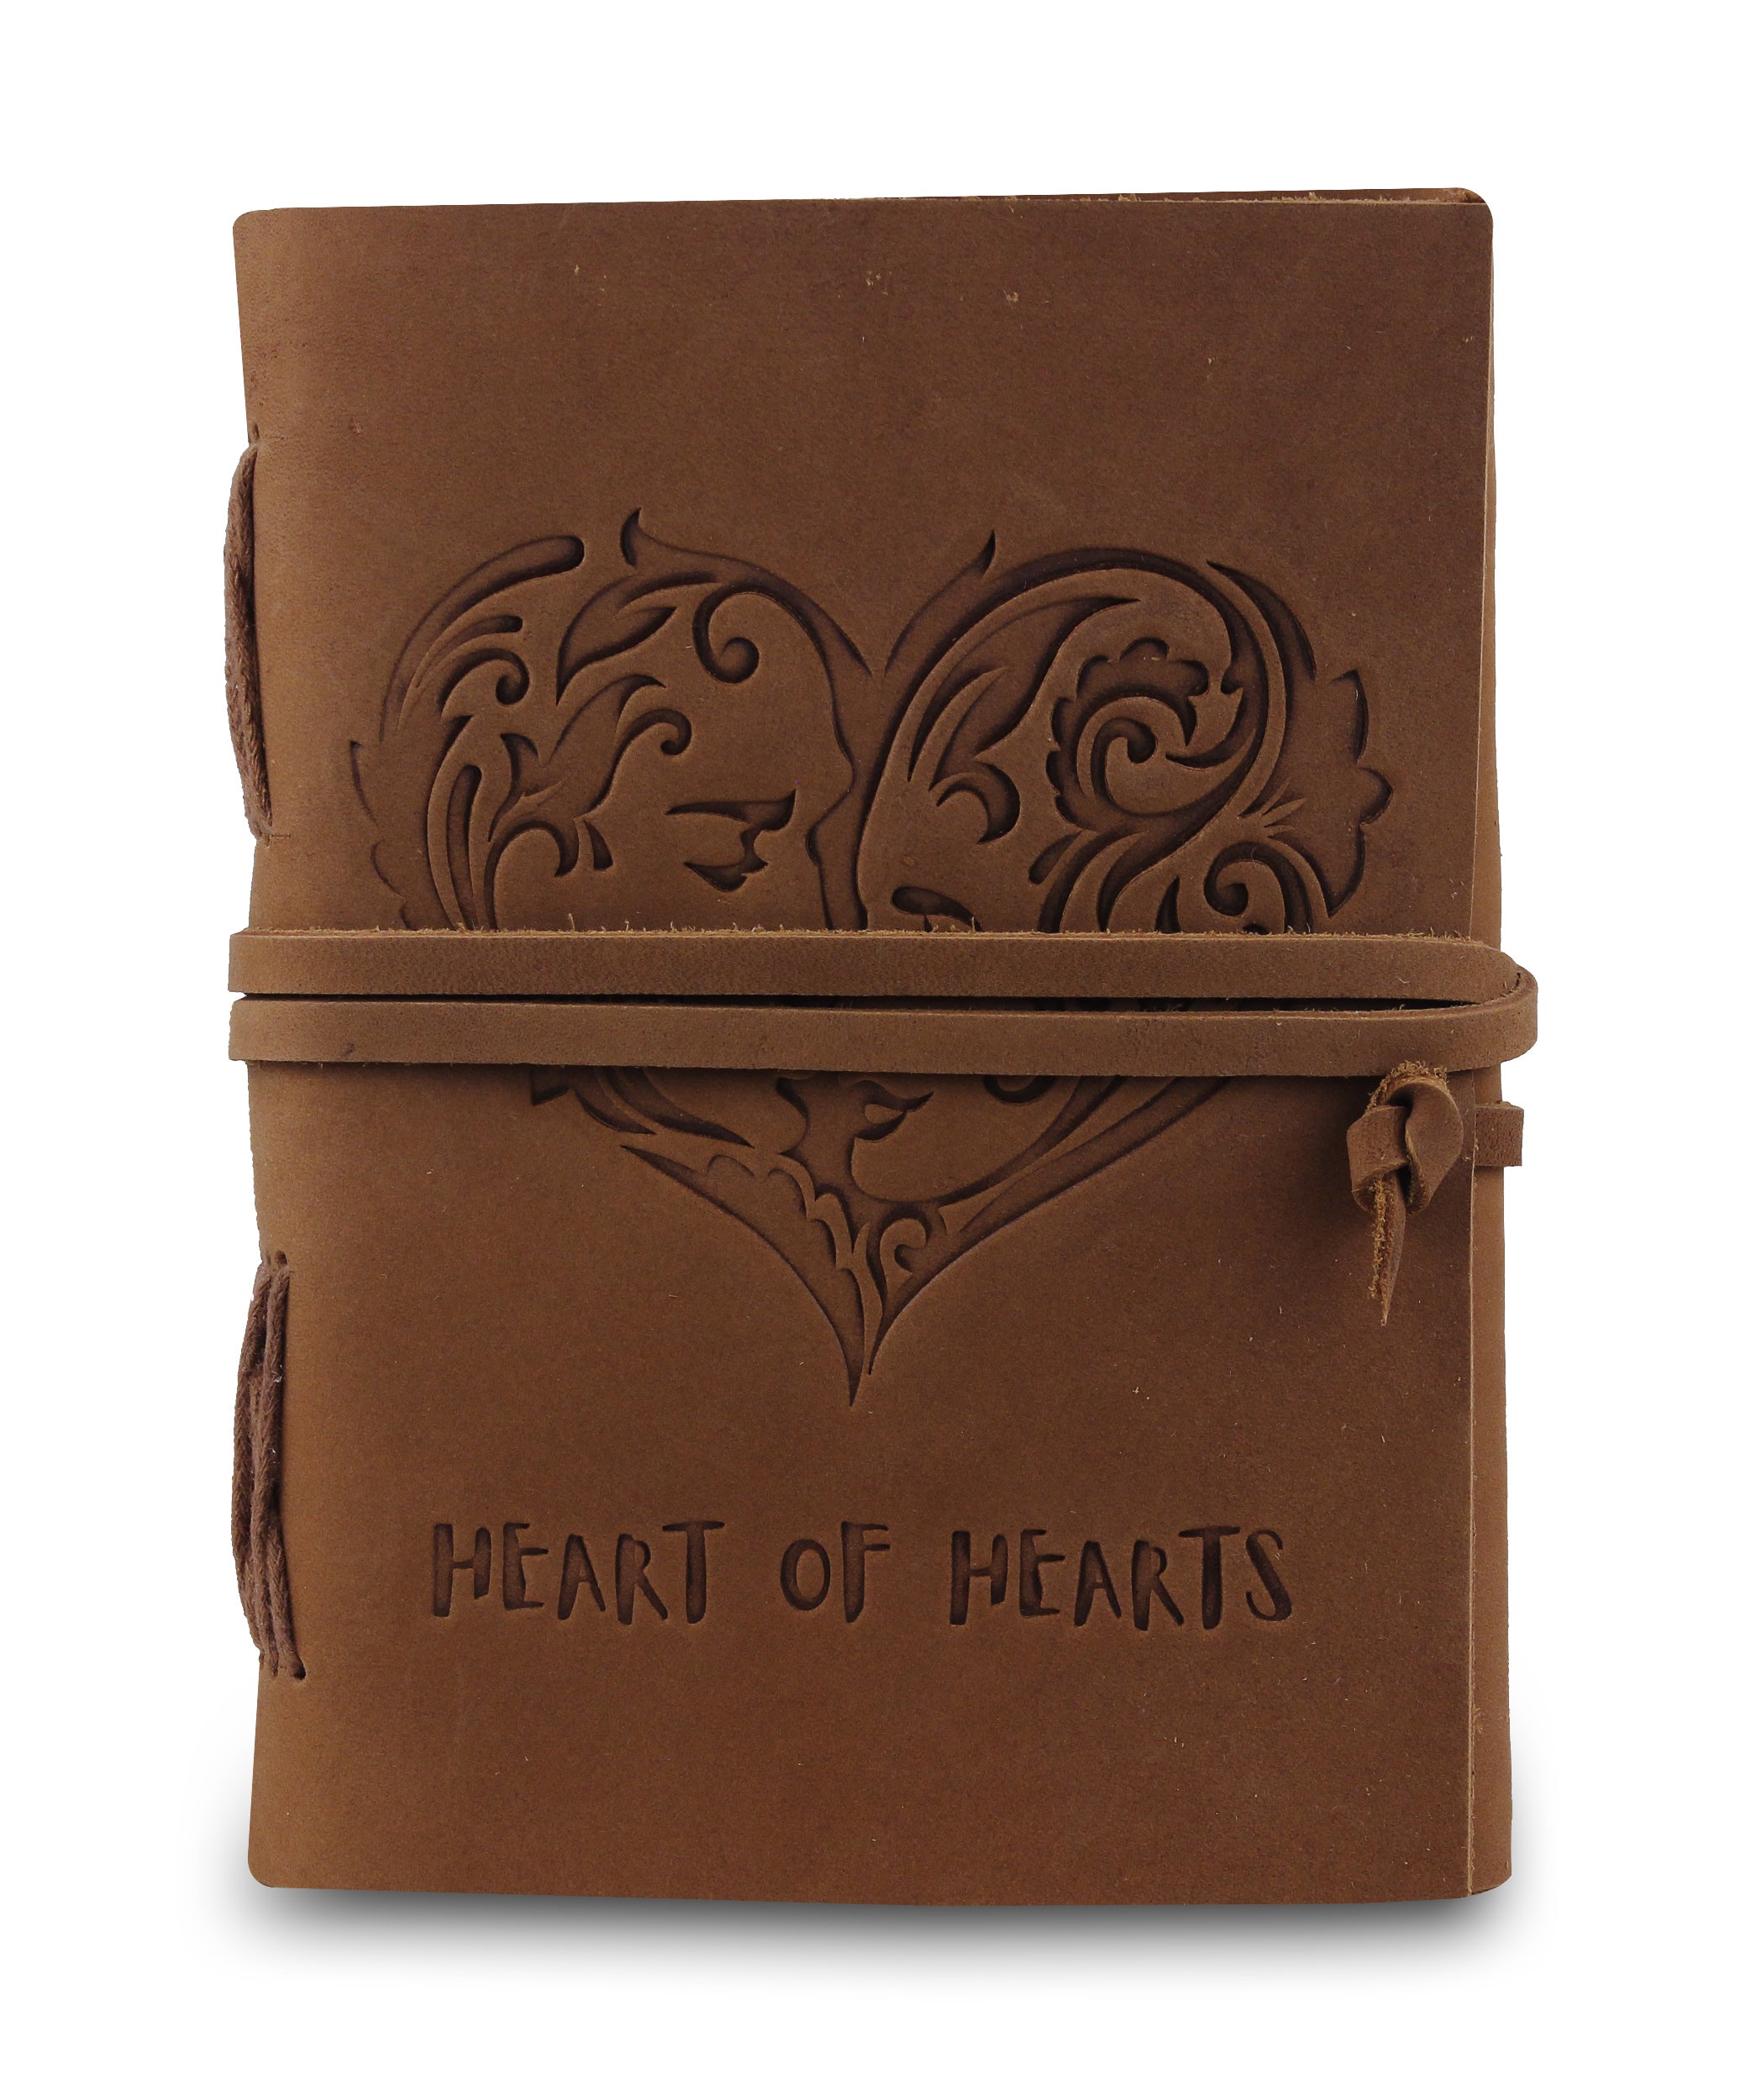 Light Brown Leather Journal By Handmade World Front View with Heart Shape Embossing, leather strap closure Heart of Heart Written at bottom of the page.